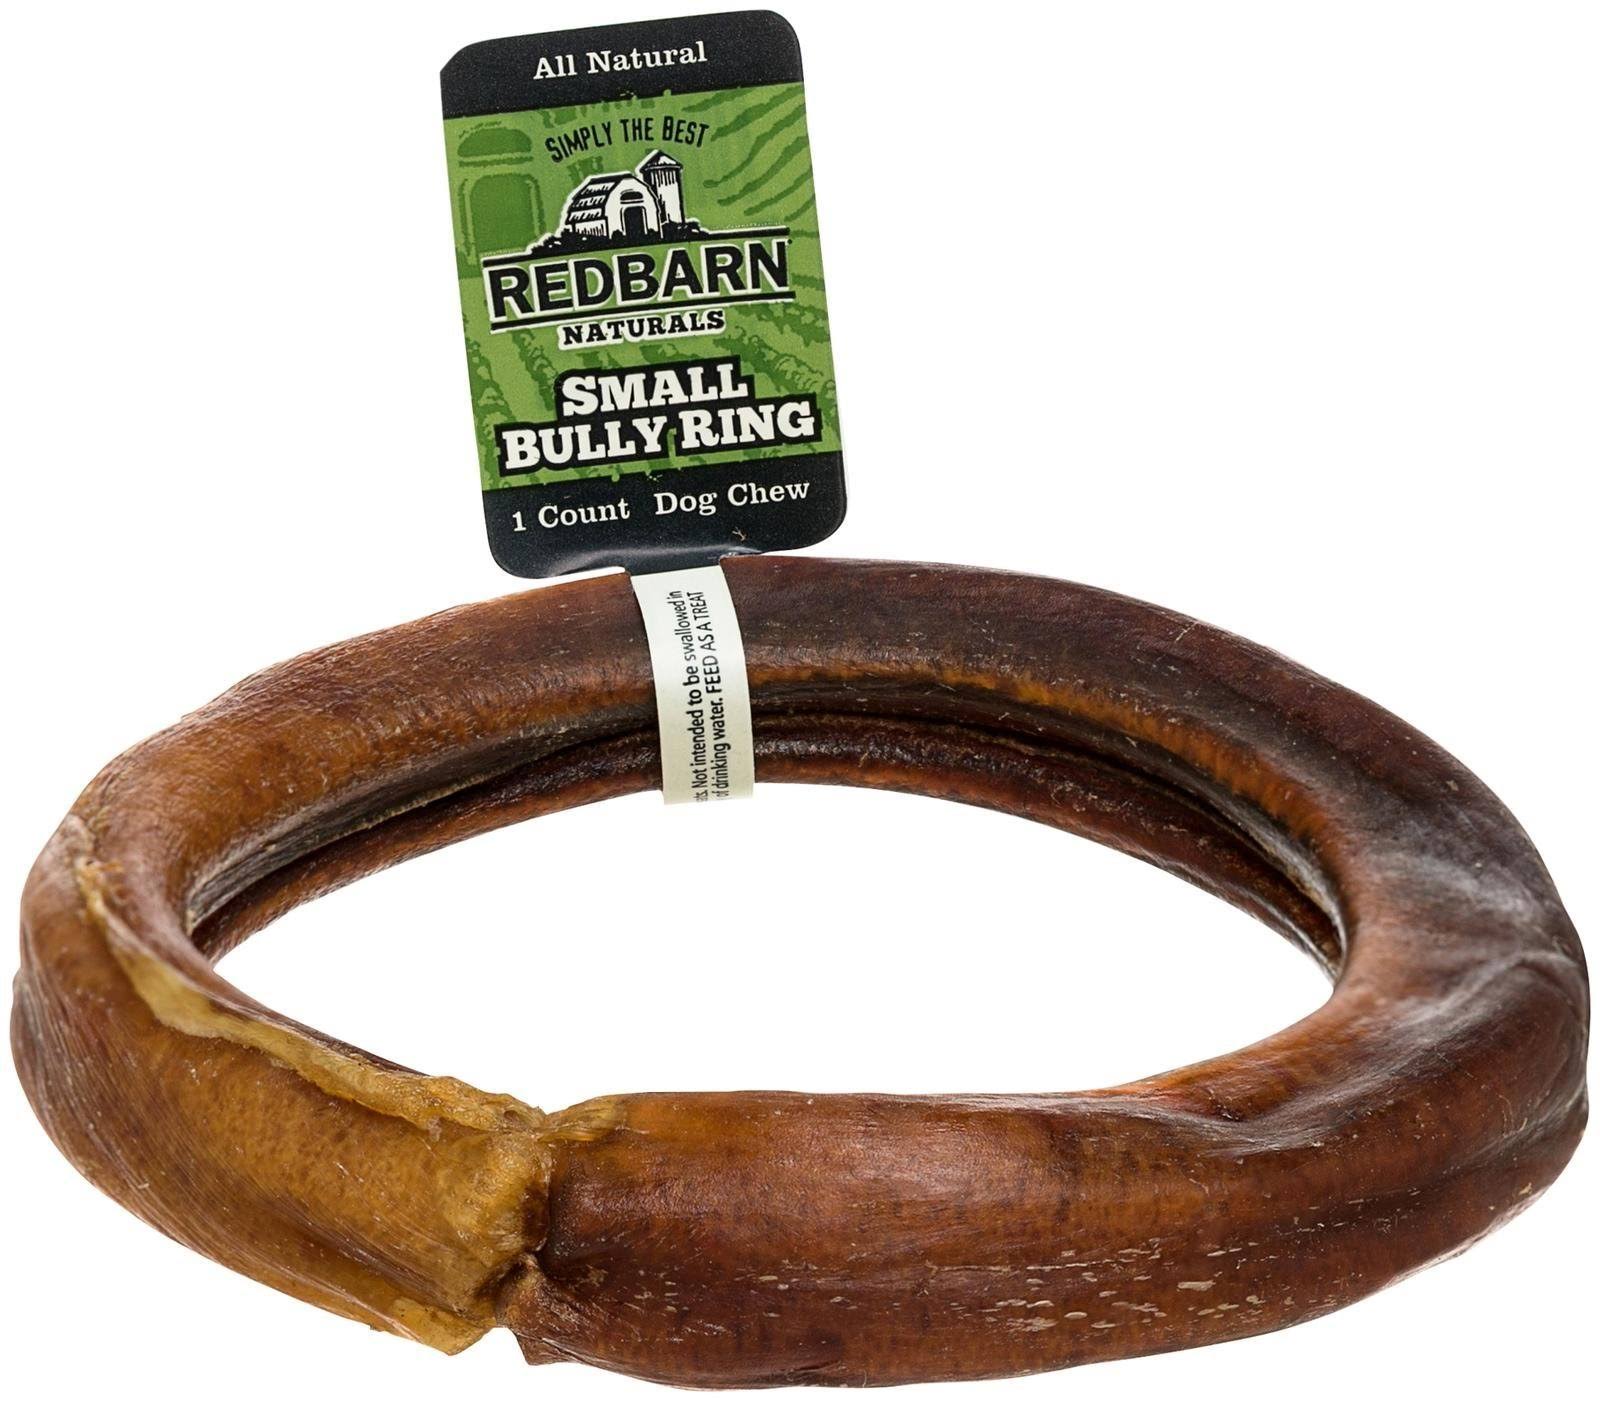 Redbarn Bully Rings 3-Count (Pack of 2)